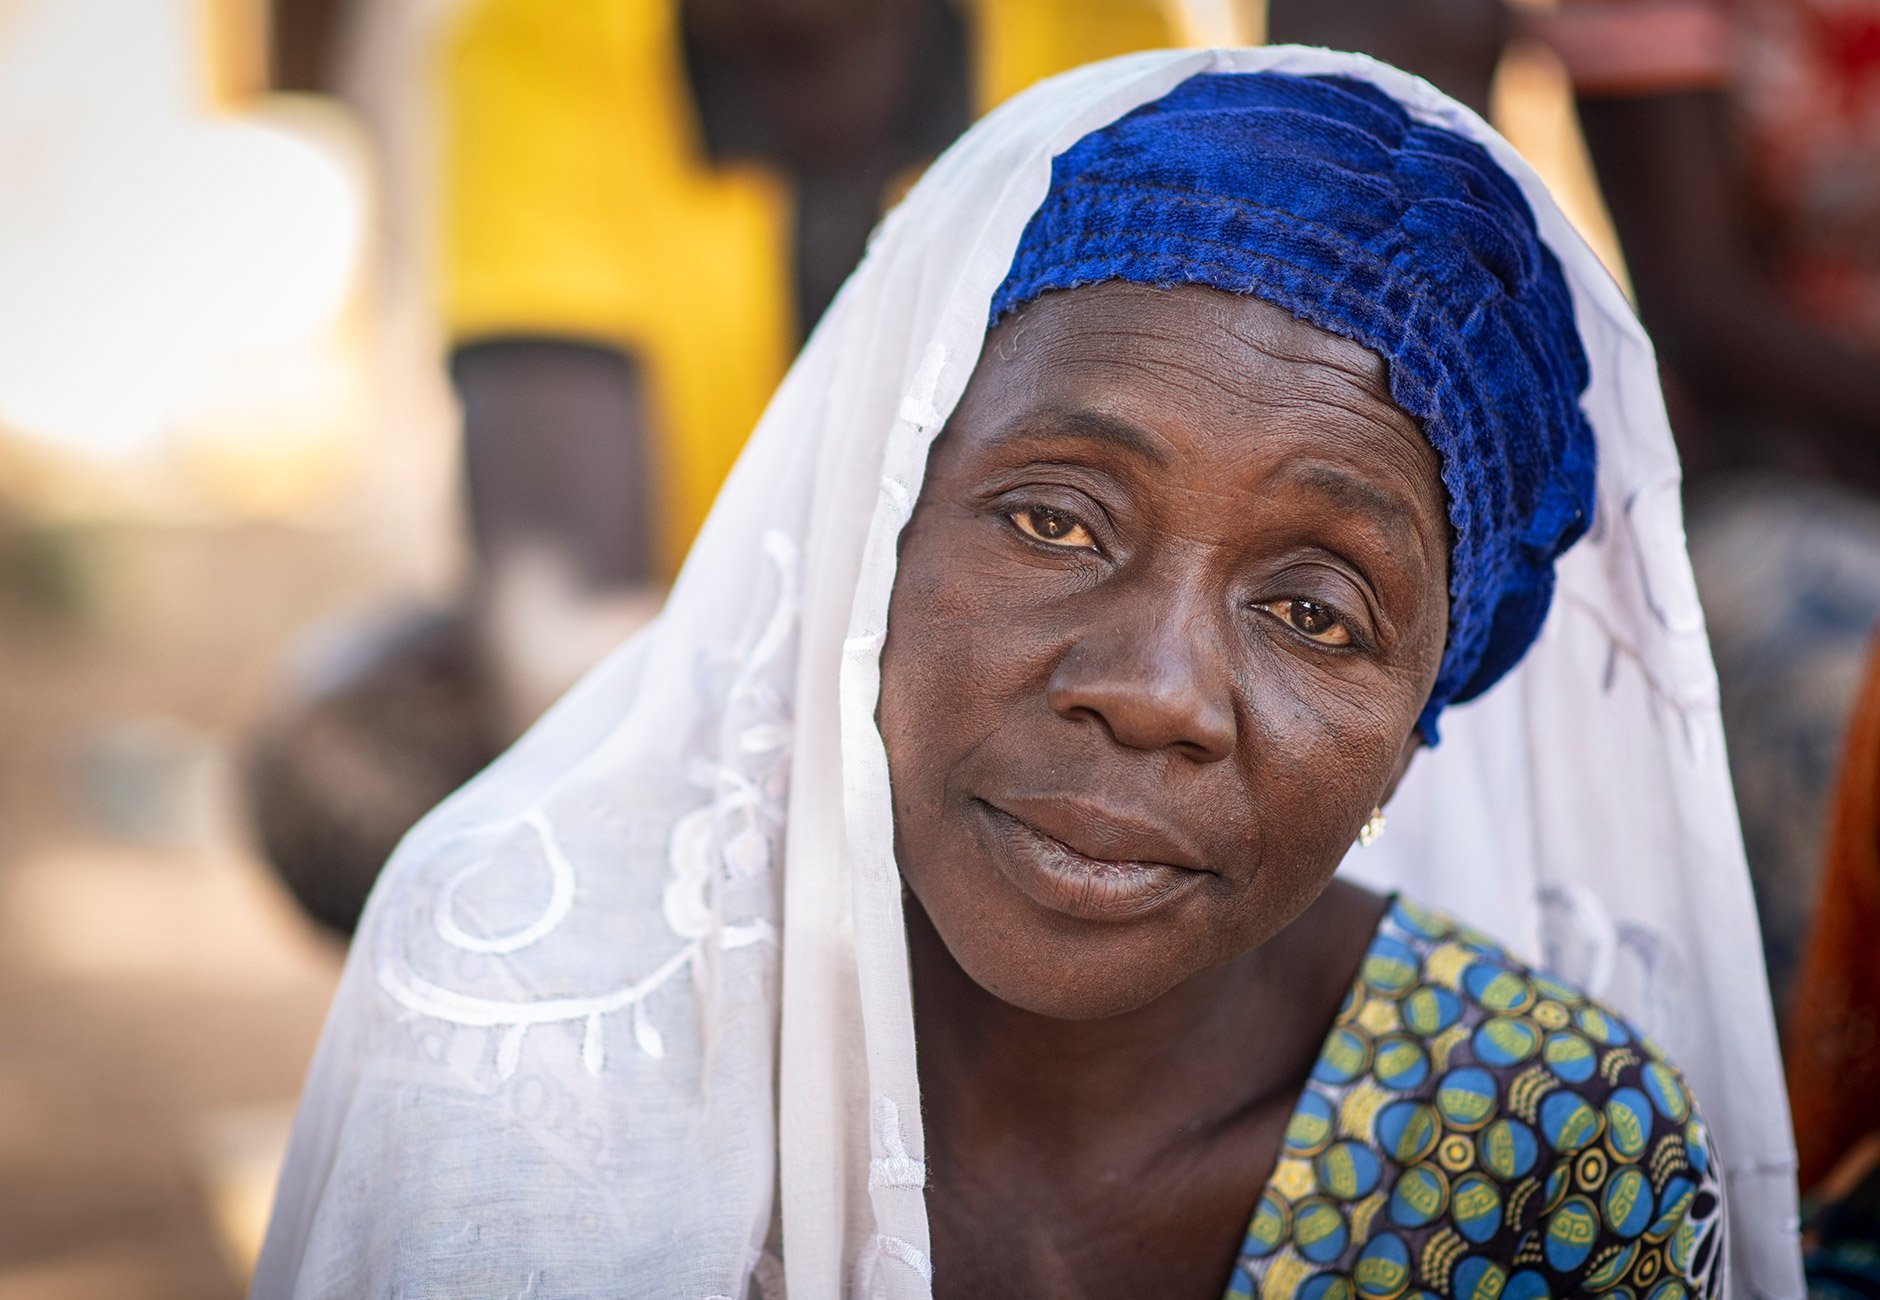 Zeinabou, 42, photographed in her relatives’ courtyard in Burkina Faso. Three days earlier, her husband was killed before her eyes.